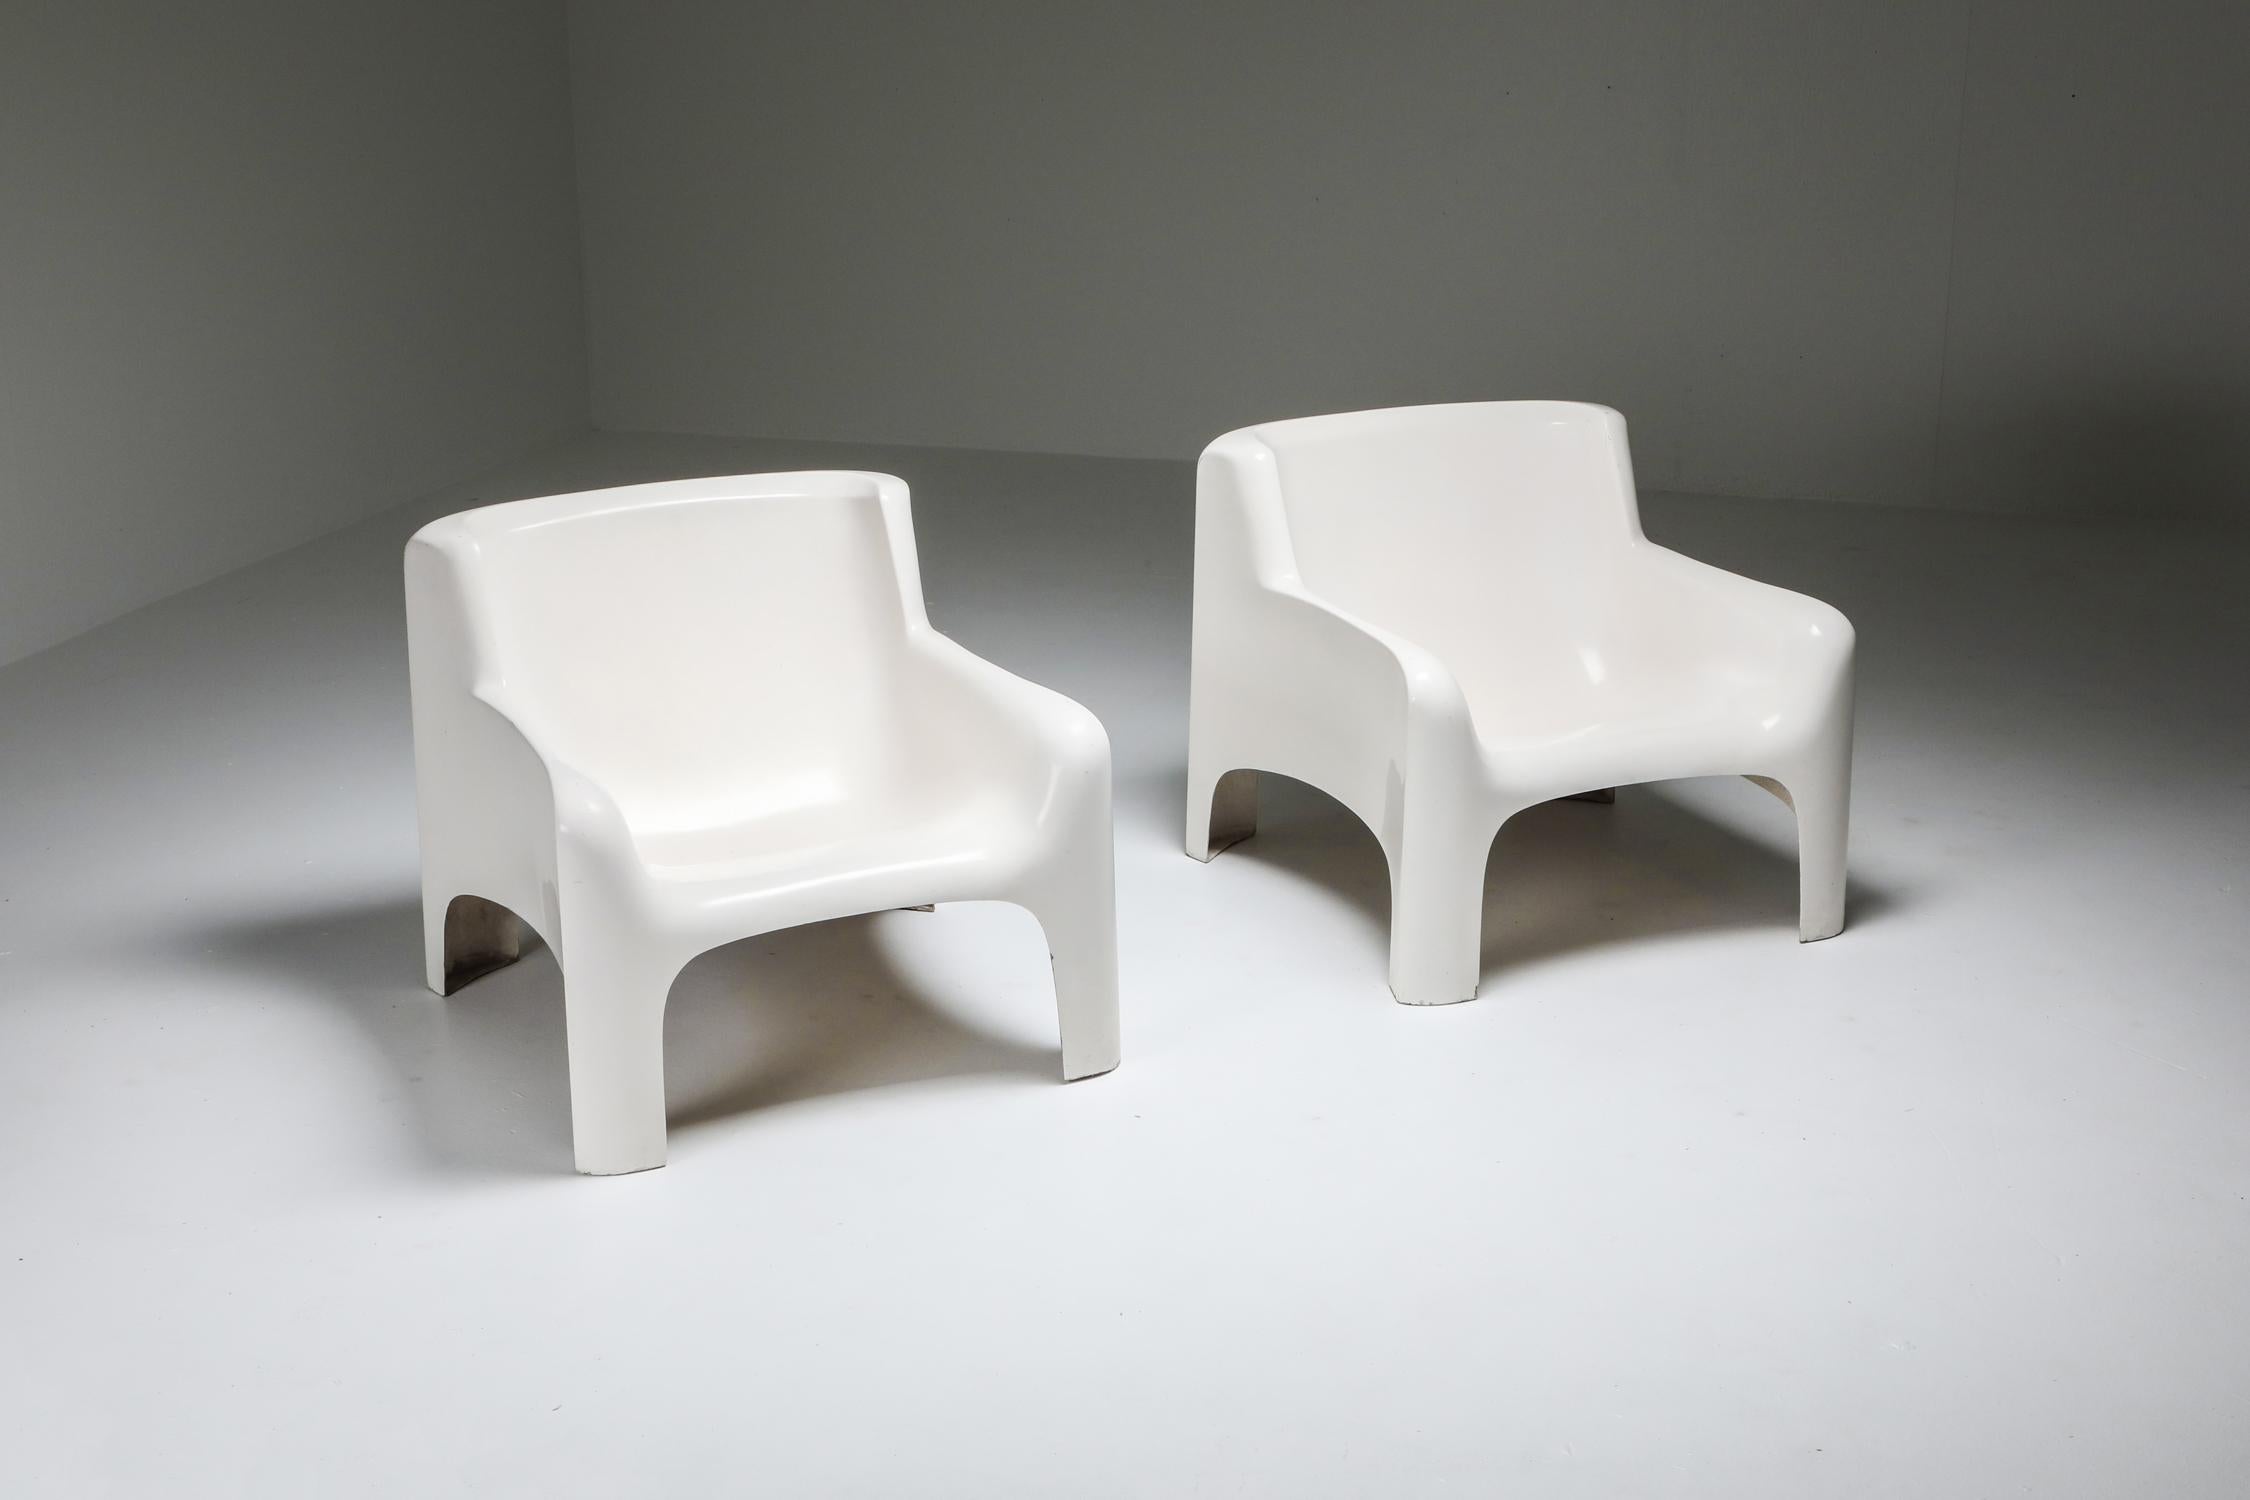 Carlo Bartali, model 'Solar', Arflex, Italy 1965, four armchairs available

Fiberglass and polyester resin with lacquer finish
These elegant lounge chairs by Carlo Bartoli were made in Italy by Arflex and imported into the US by Stendig. 
The